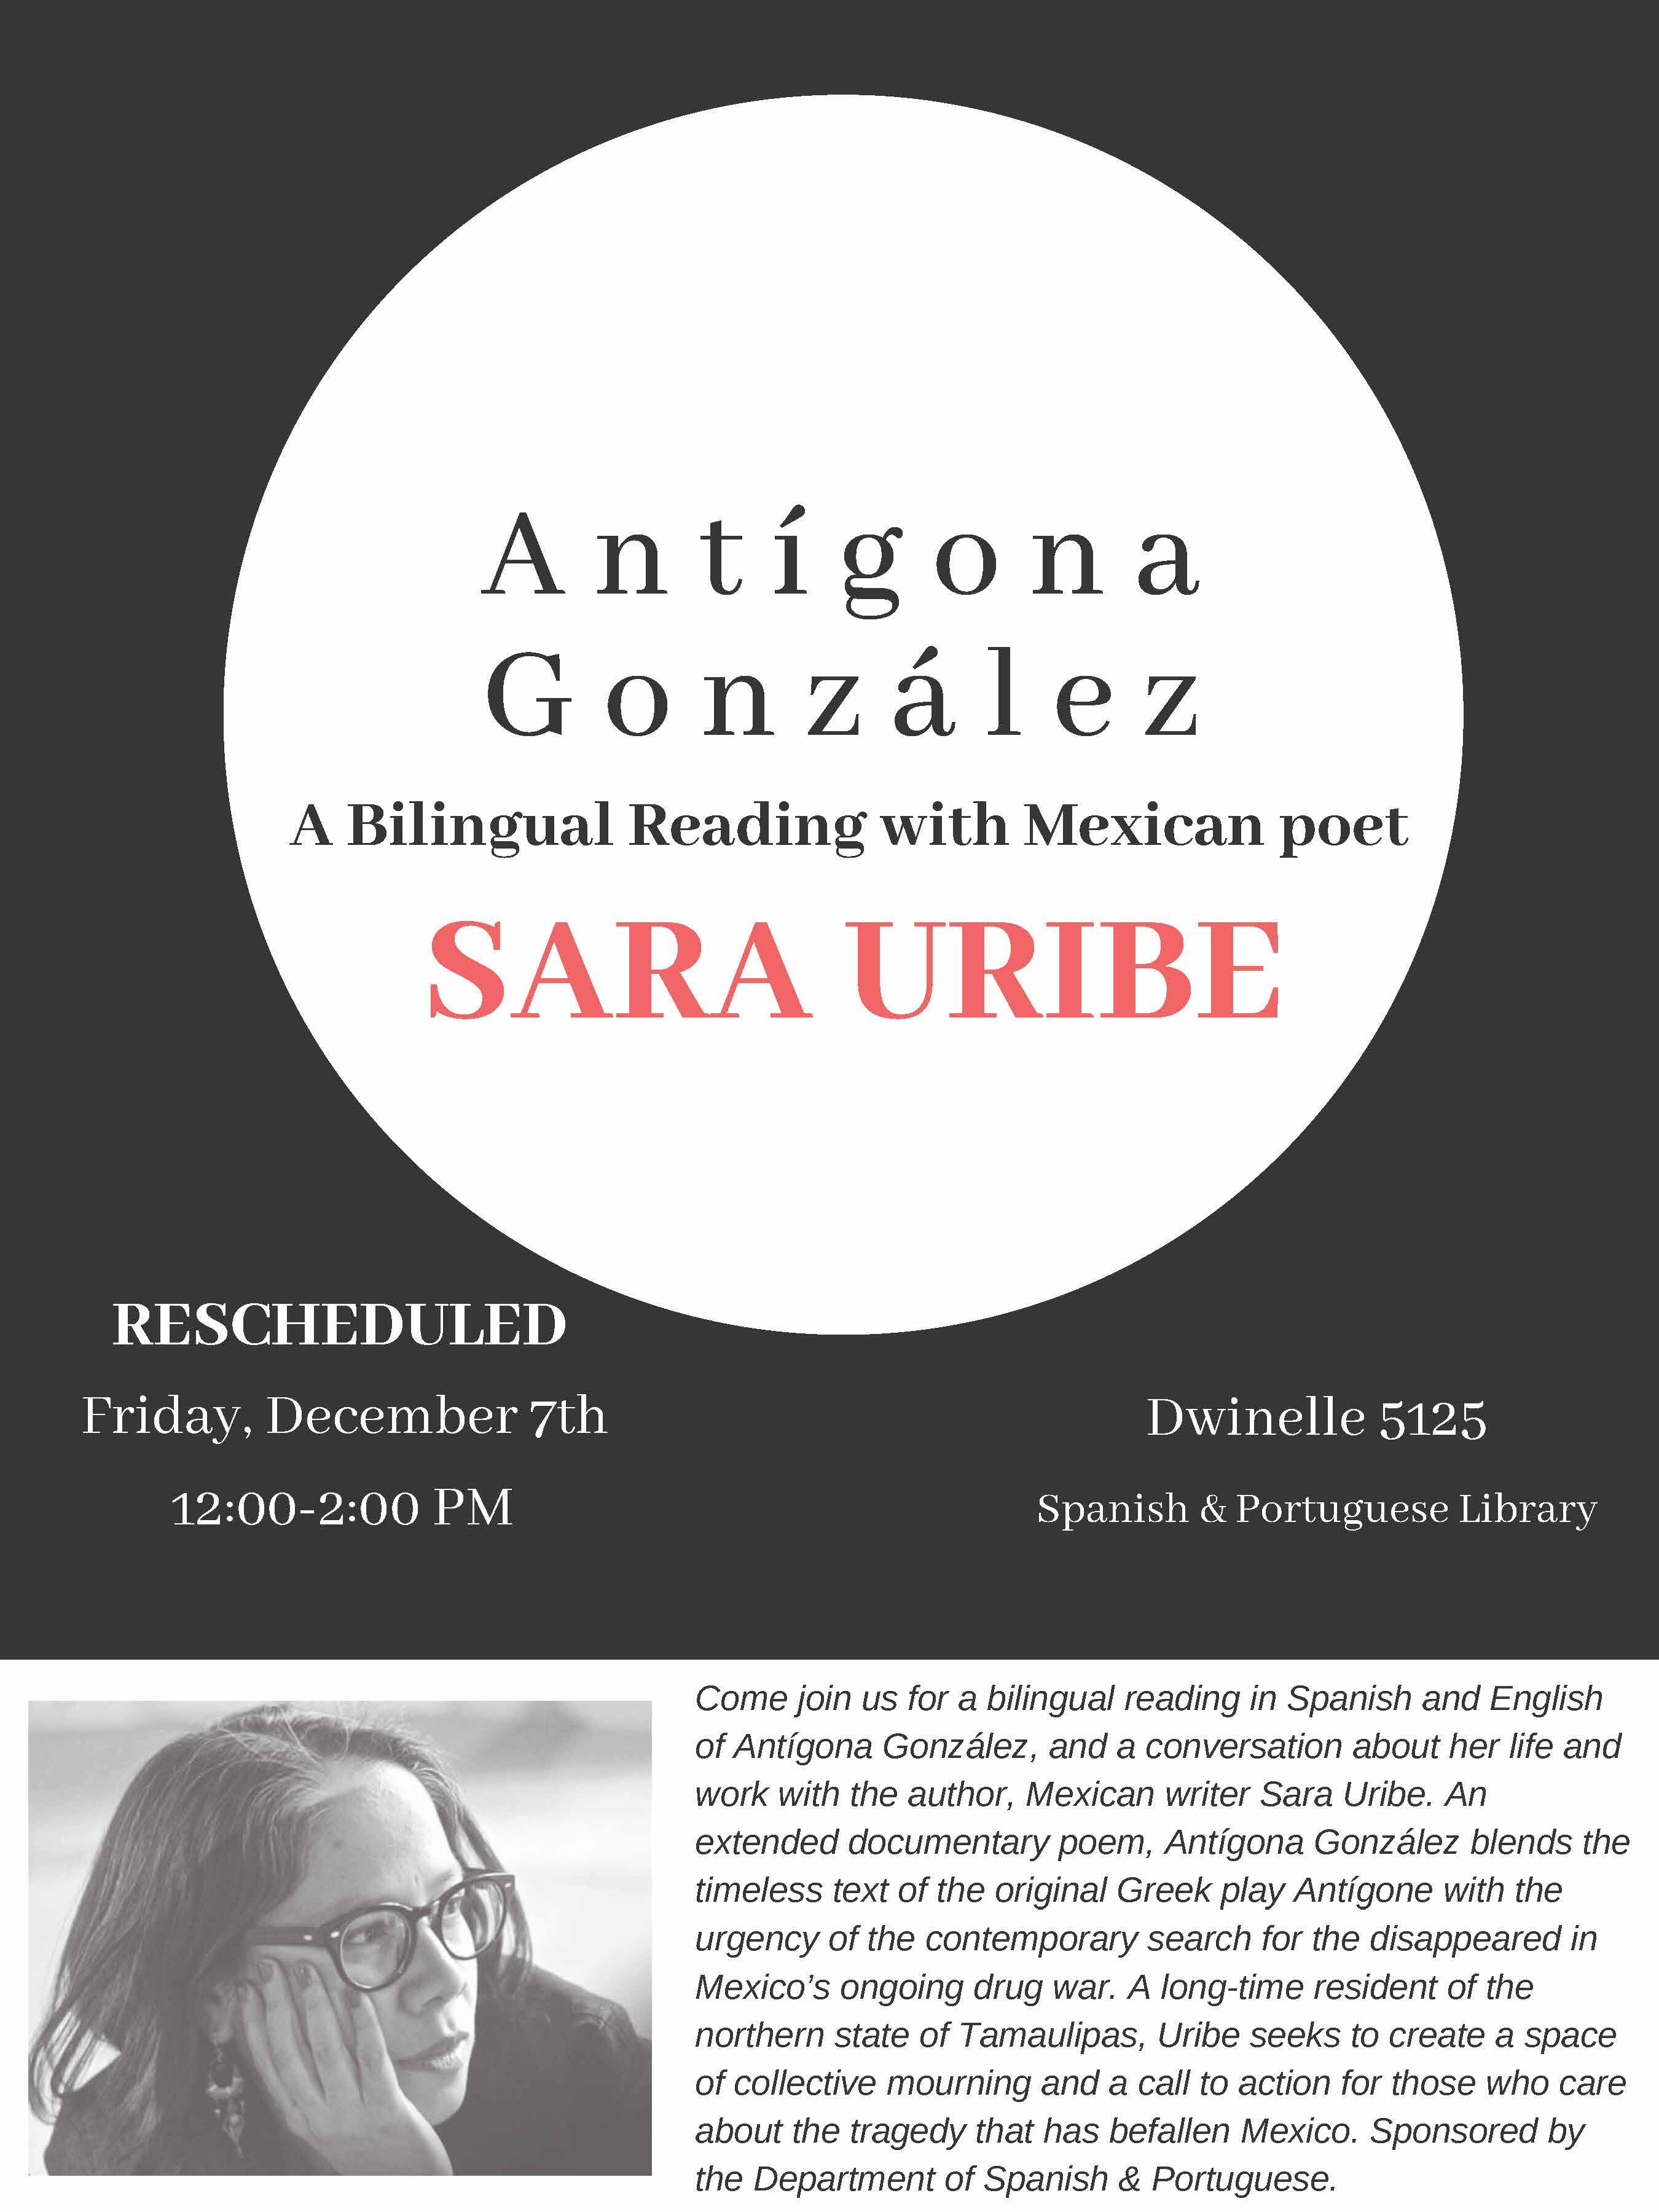  A Bilingual Reading with Mexican Poet Sara Uribe